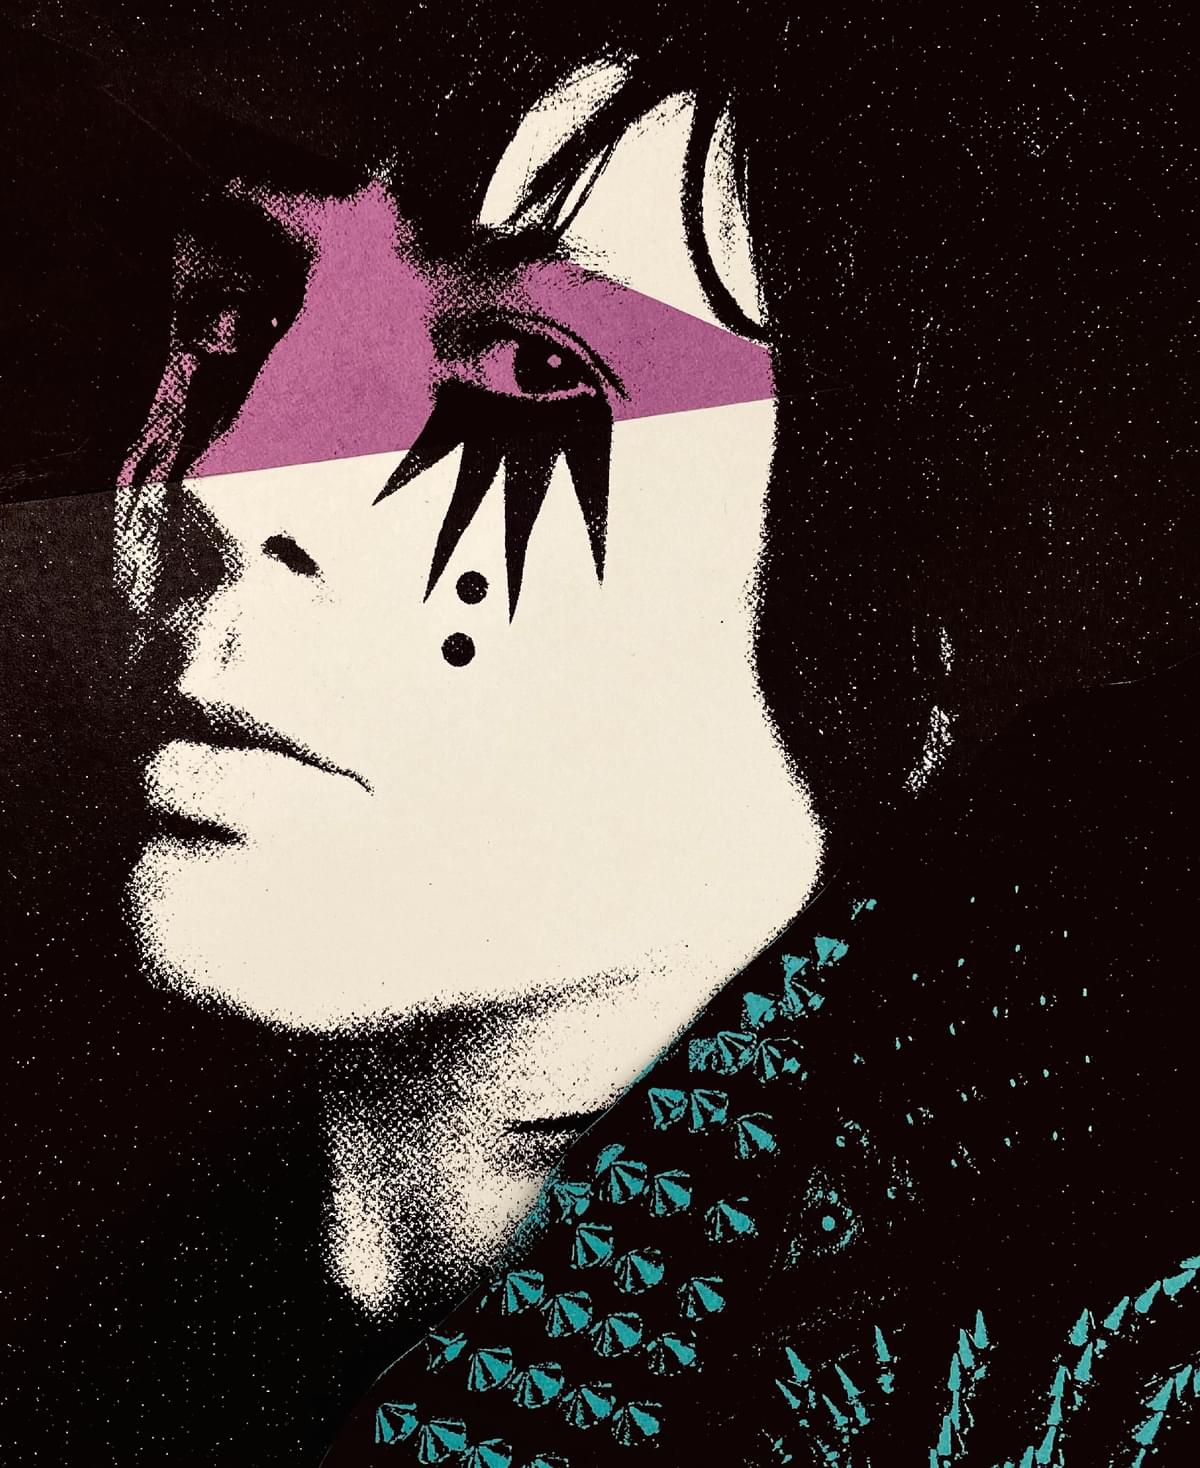 Johnny Jewel announces his forthcoming album soundtrack, Holly (OST)